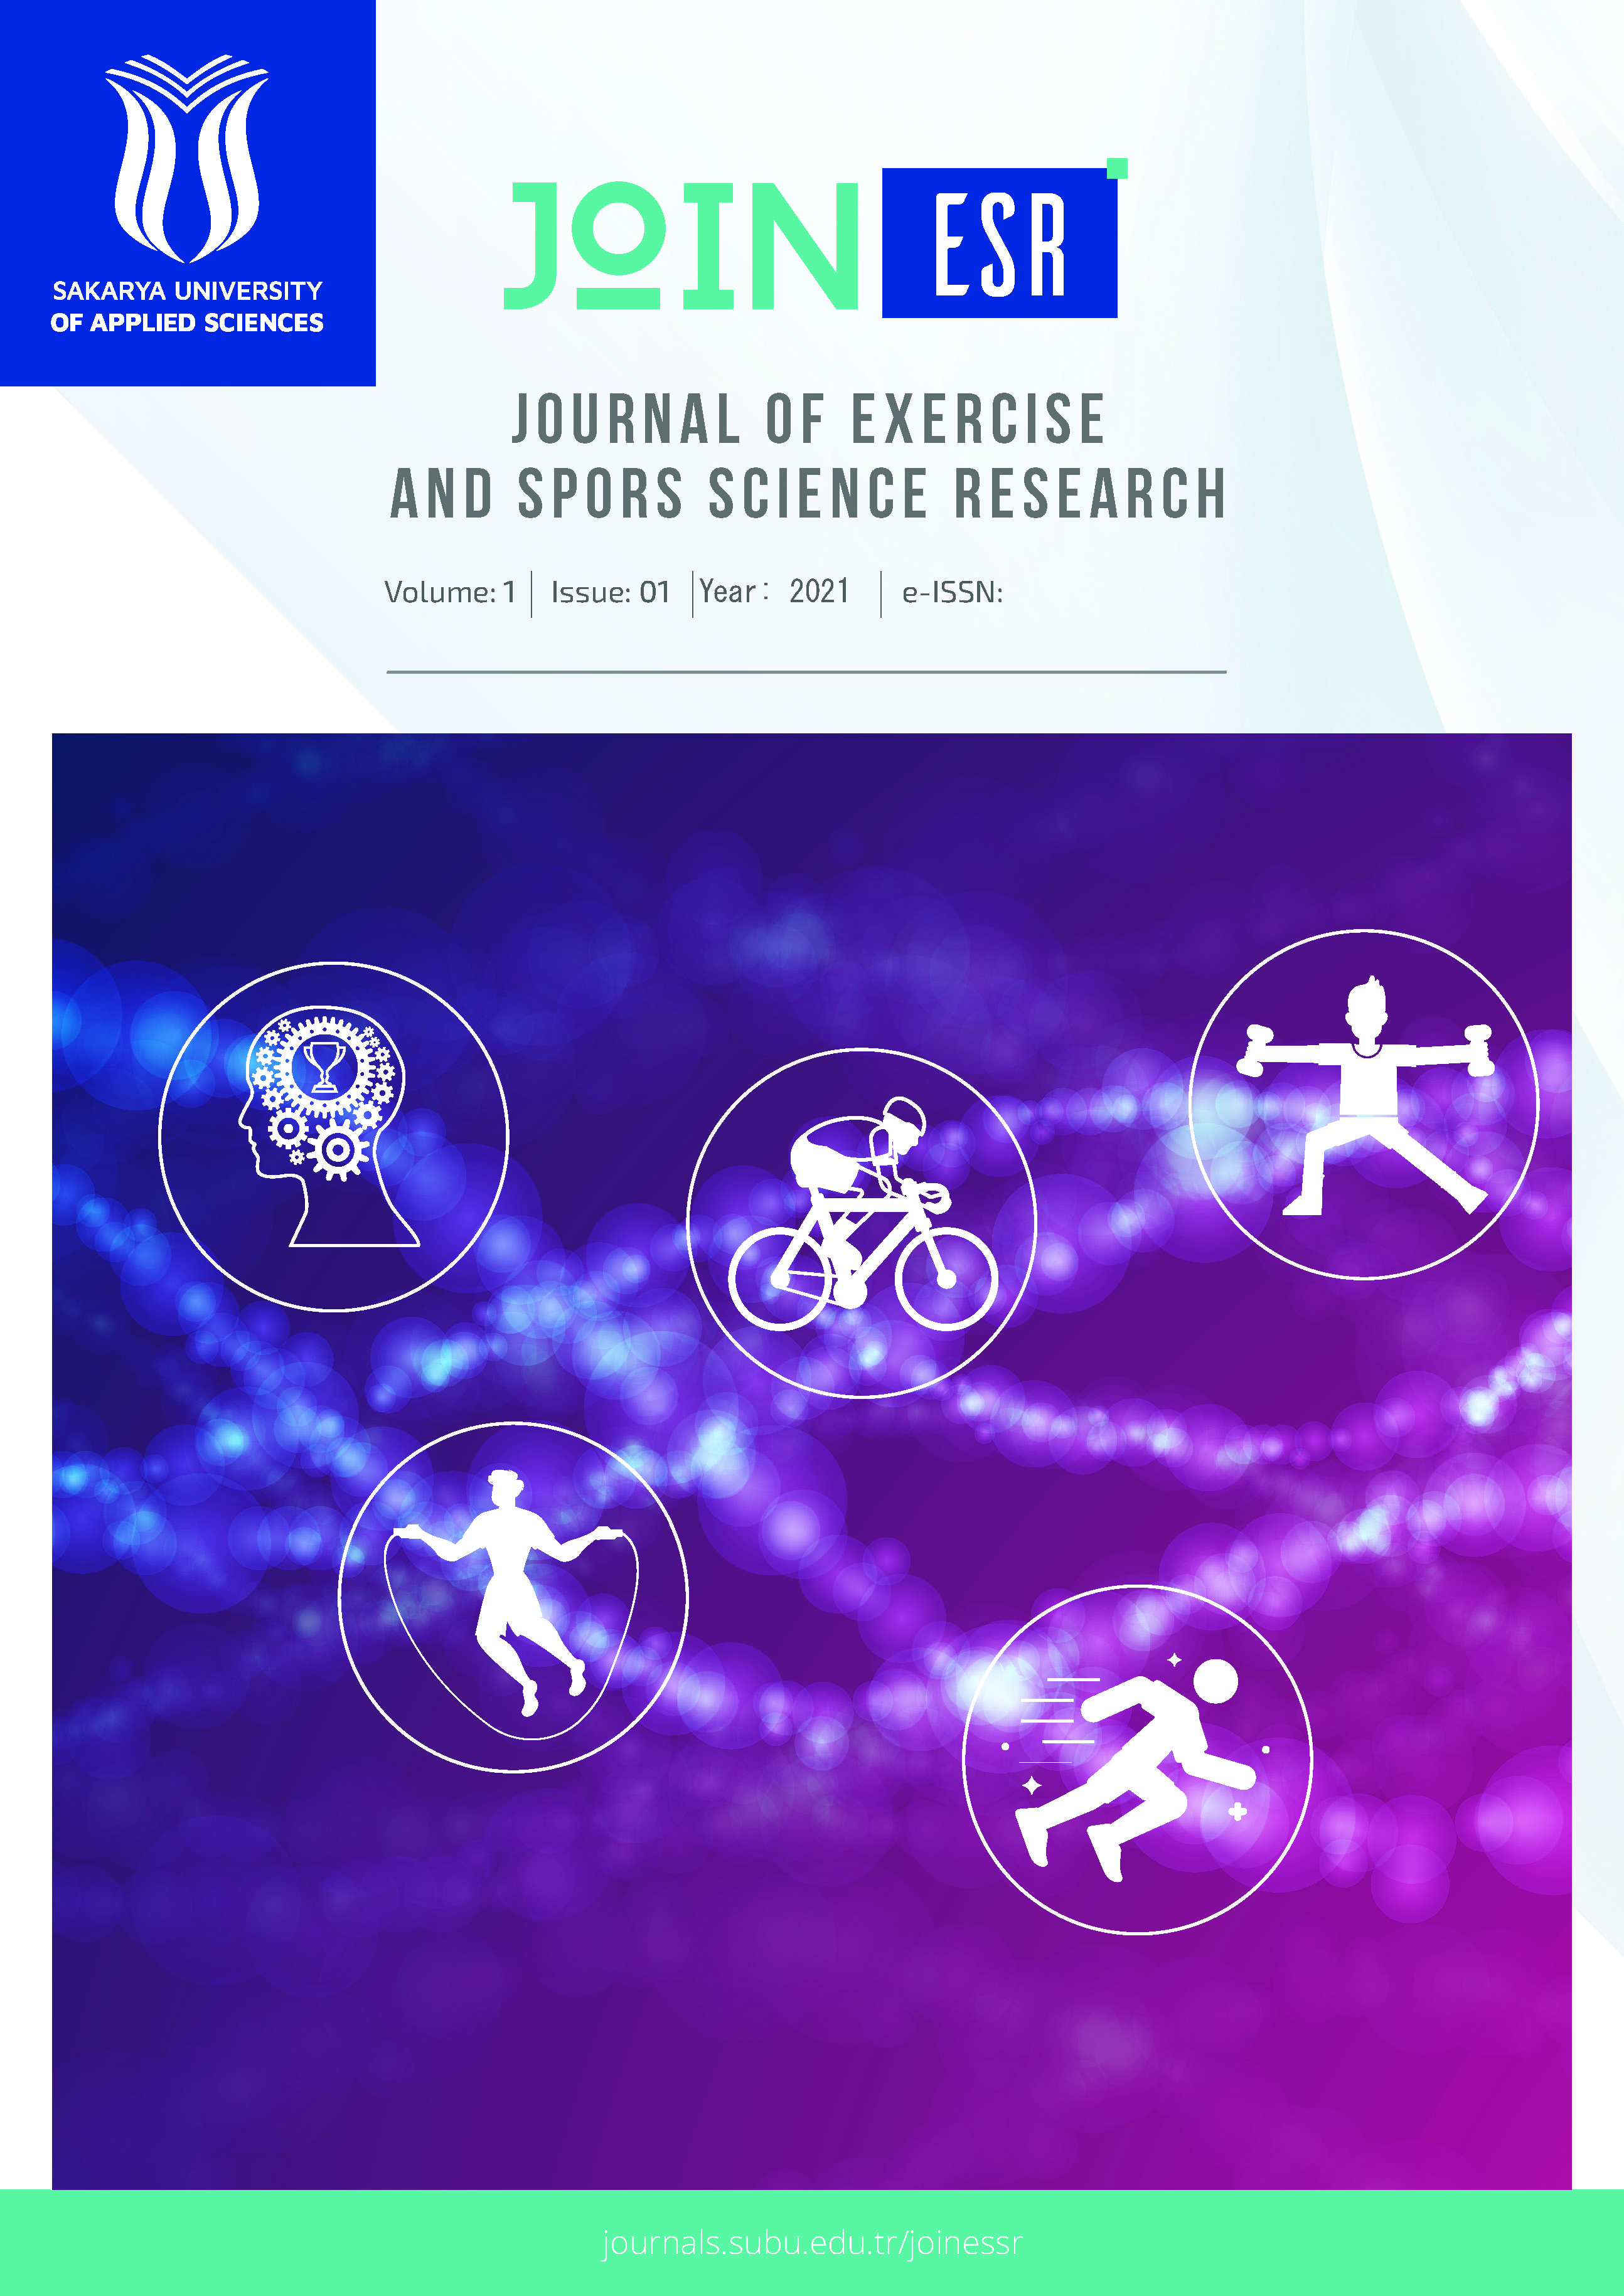 JOURNAL OF EXERCISE AND SPORT SCIENCES RESEARCH